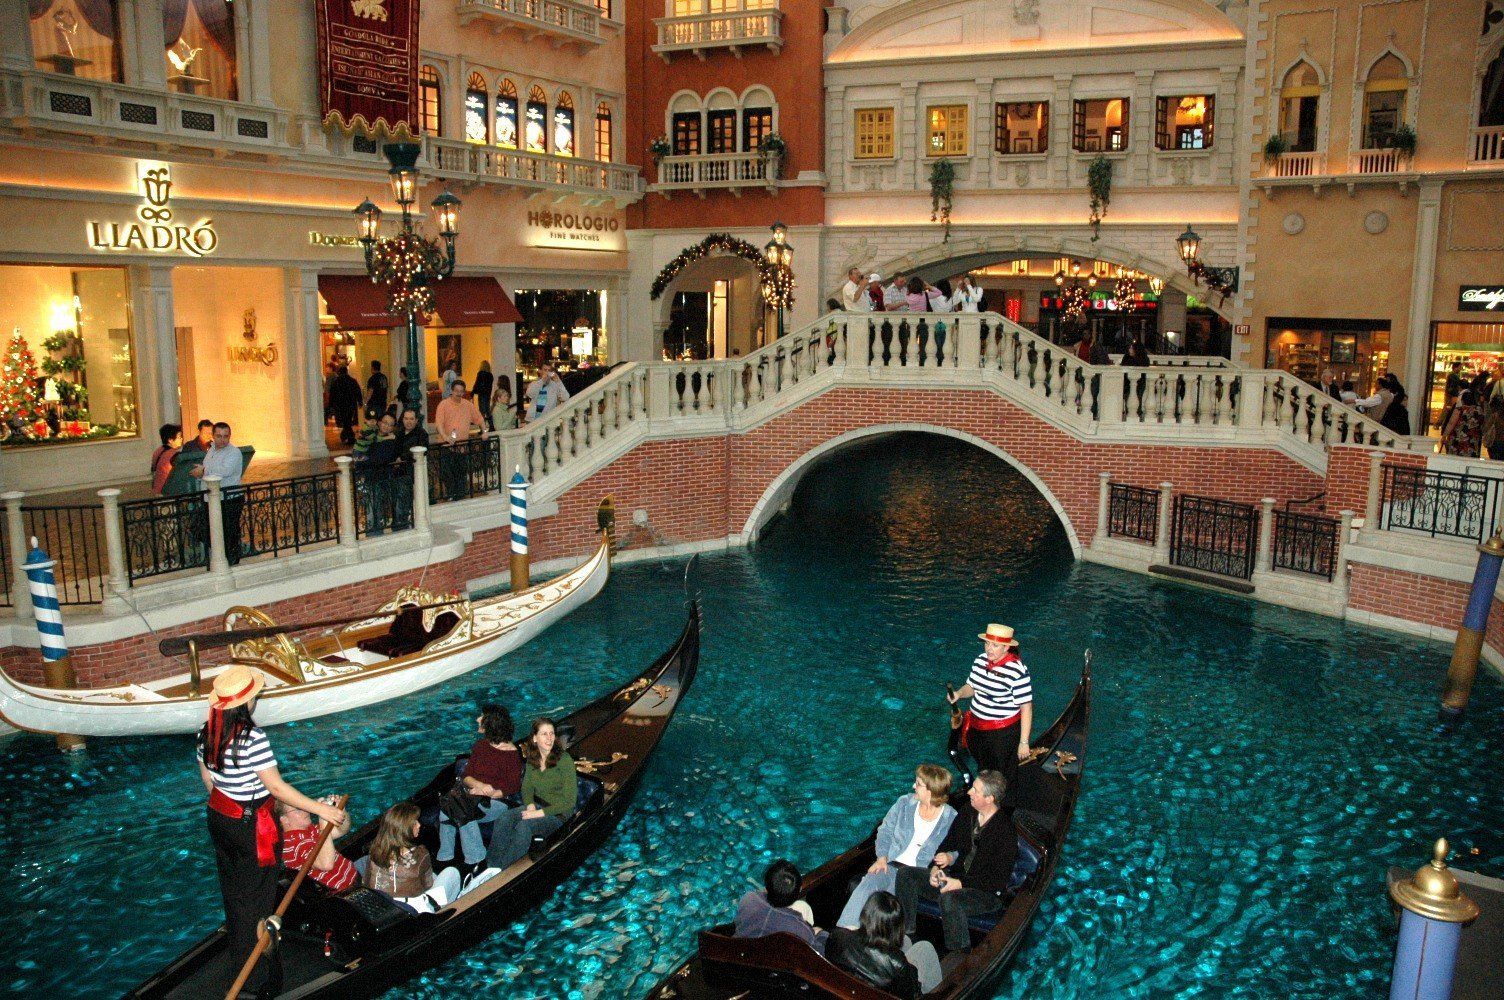 The Venetian comes close, but fails to capture the essence of Venice